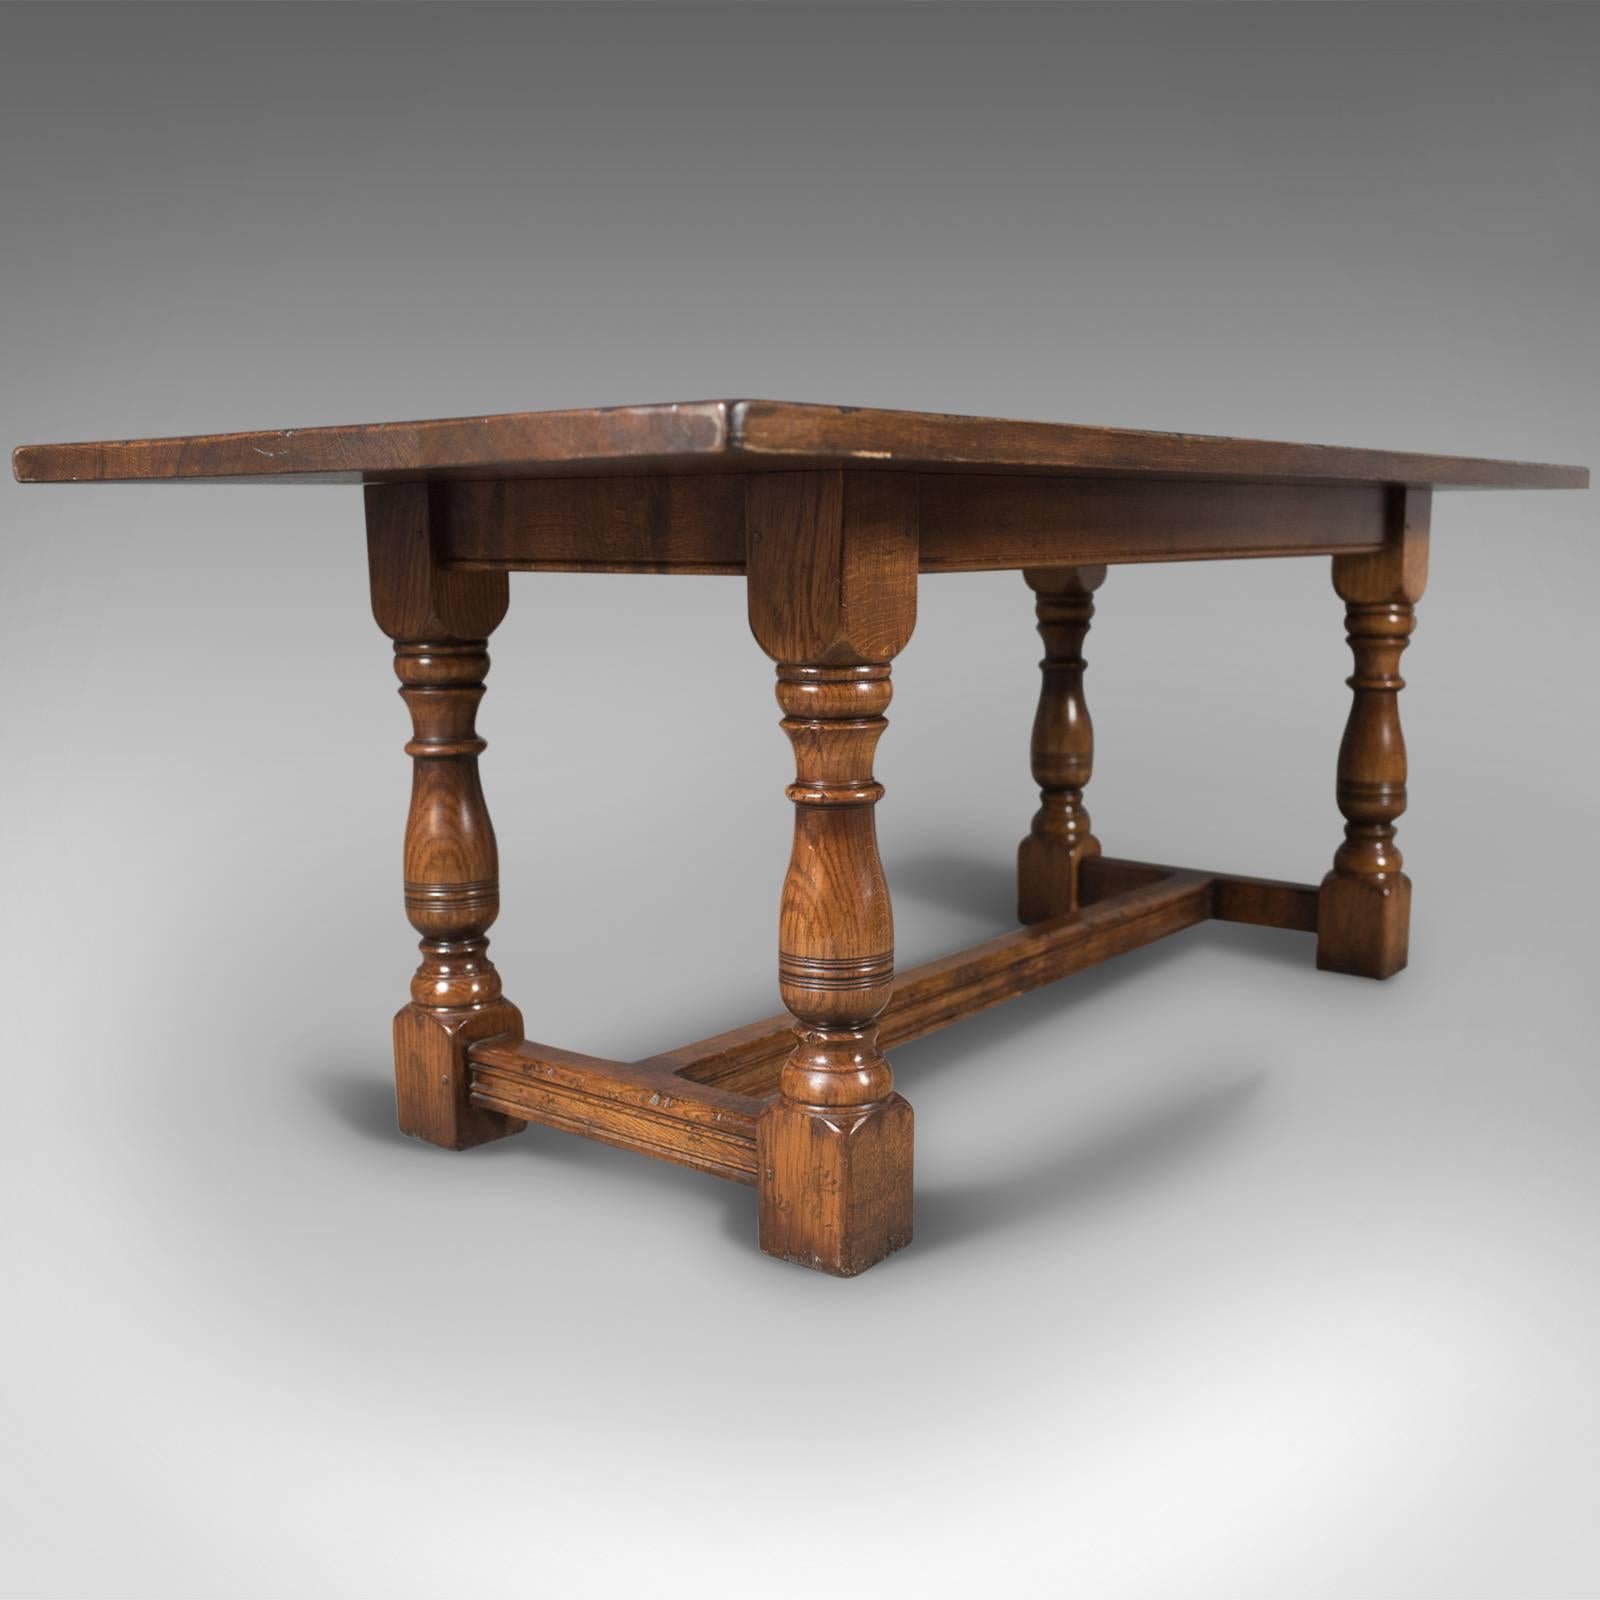 Country Six-Eight-Seat Oak Refectory Table, 17th Century Revival, Late 20th Century